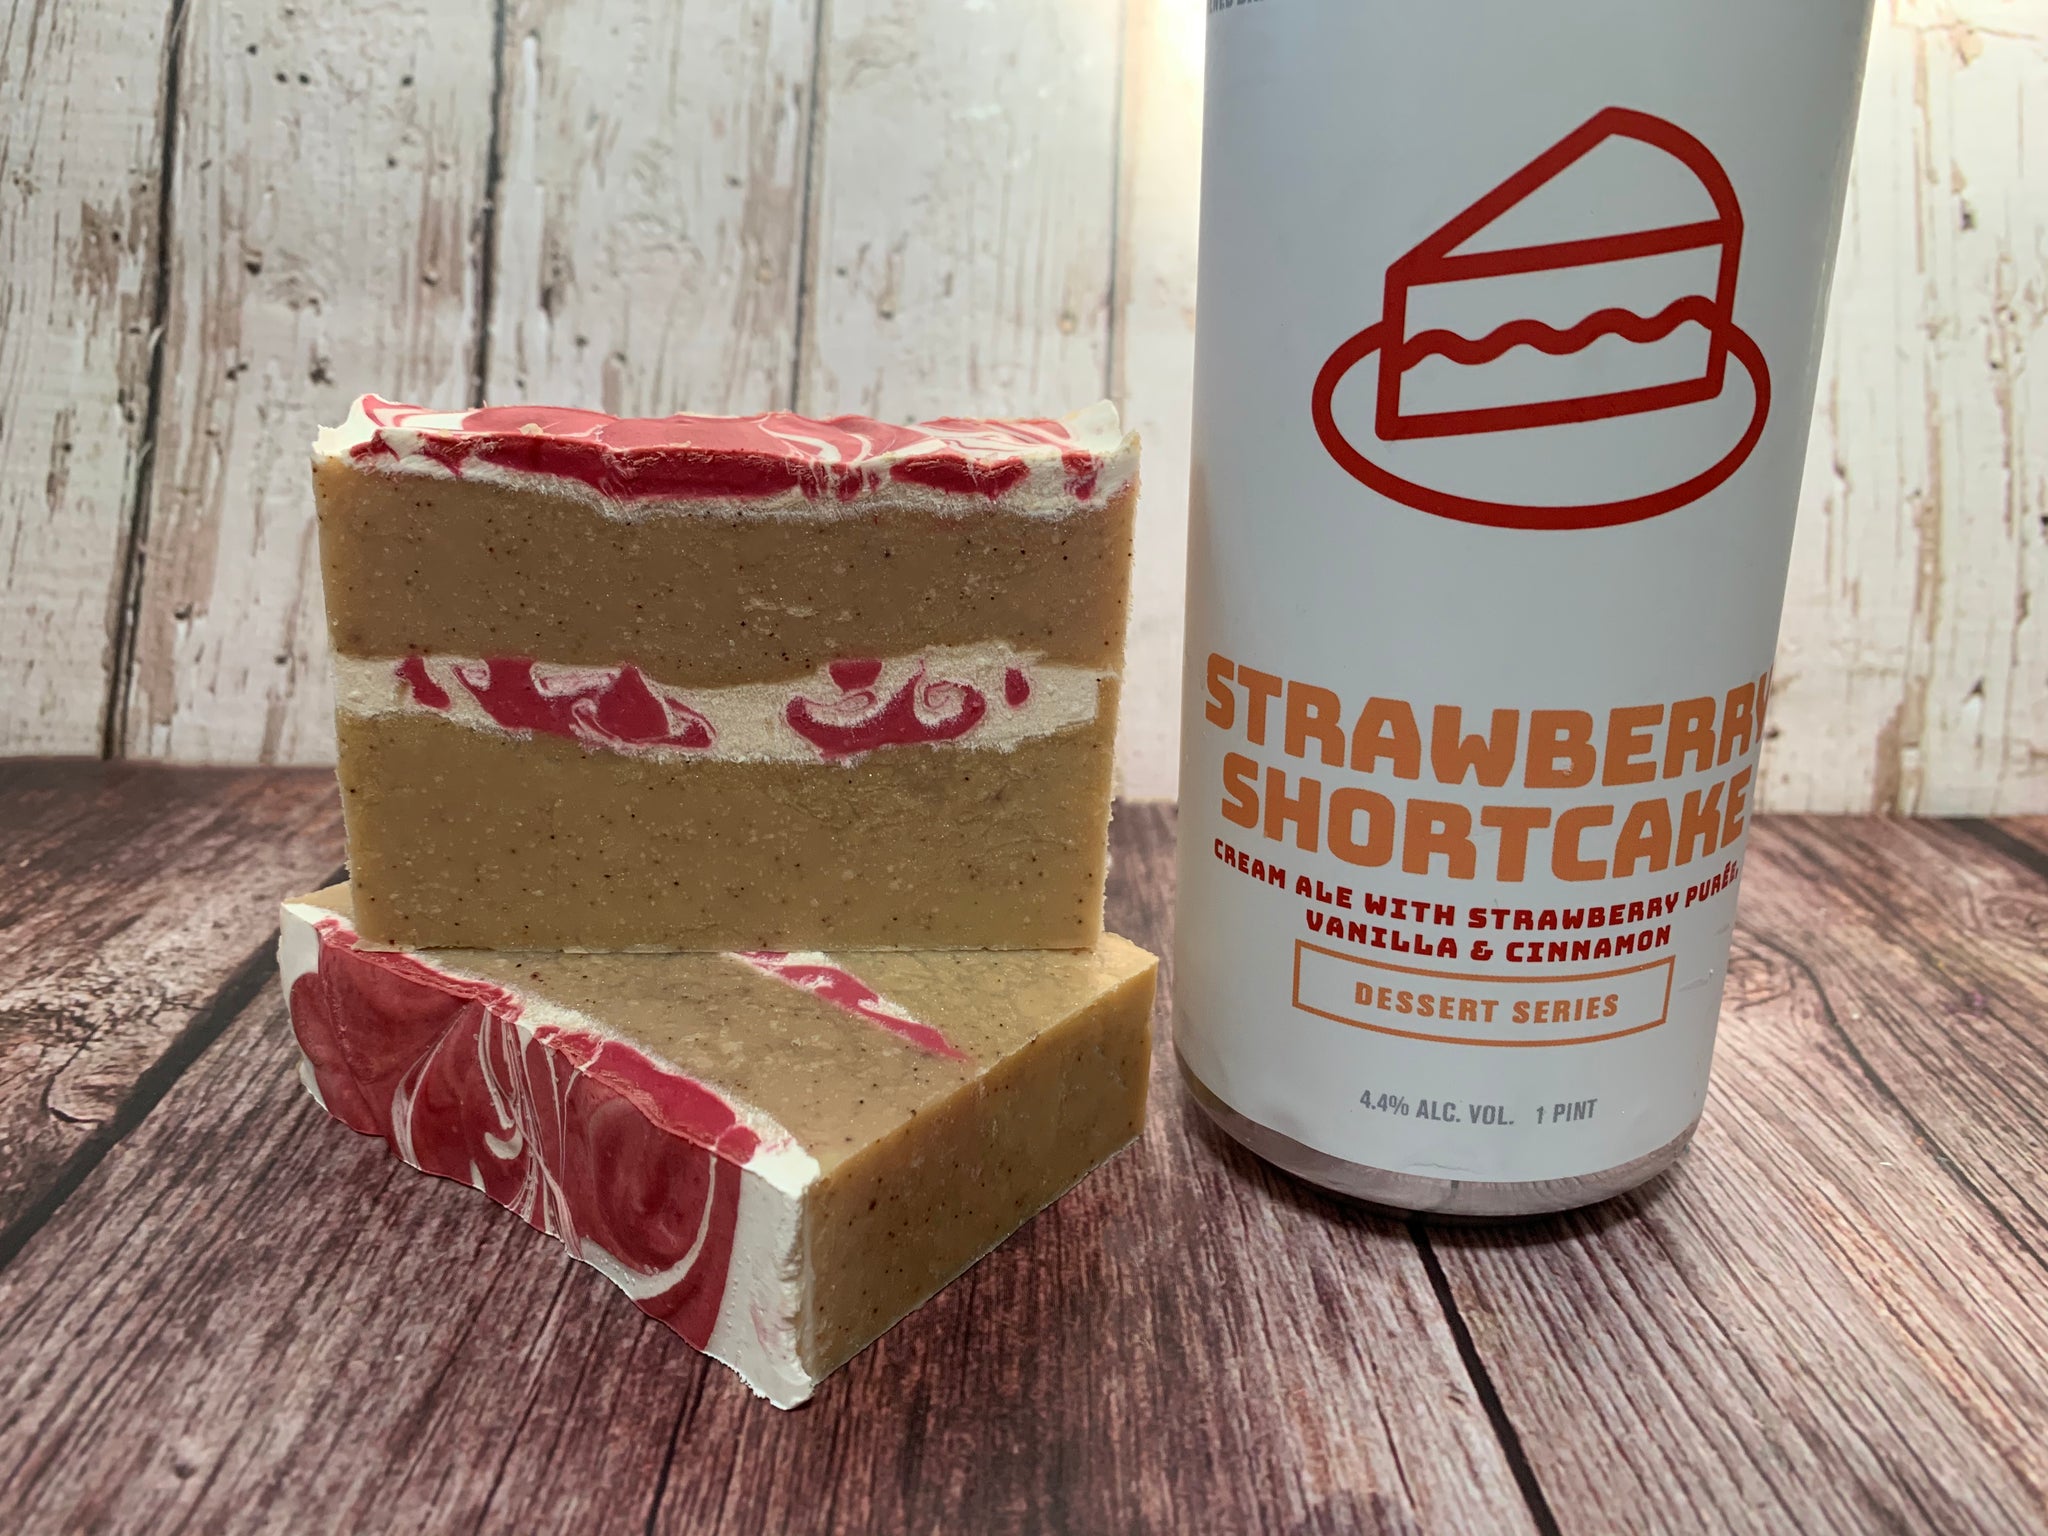 strawberry shortcake craft beer soap handmade with craft beer from Braxton brewing company dessert craft beer soap